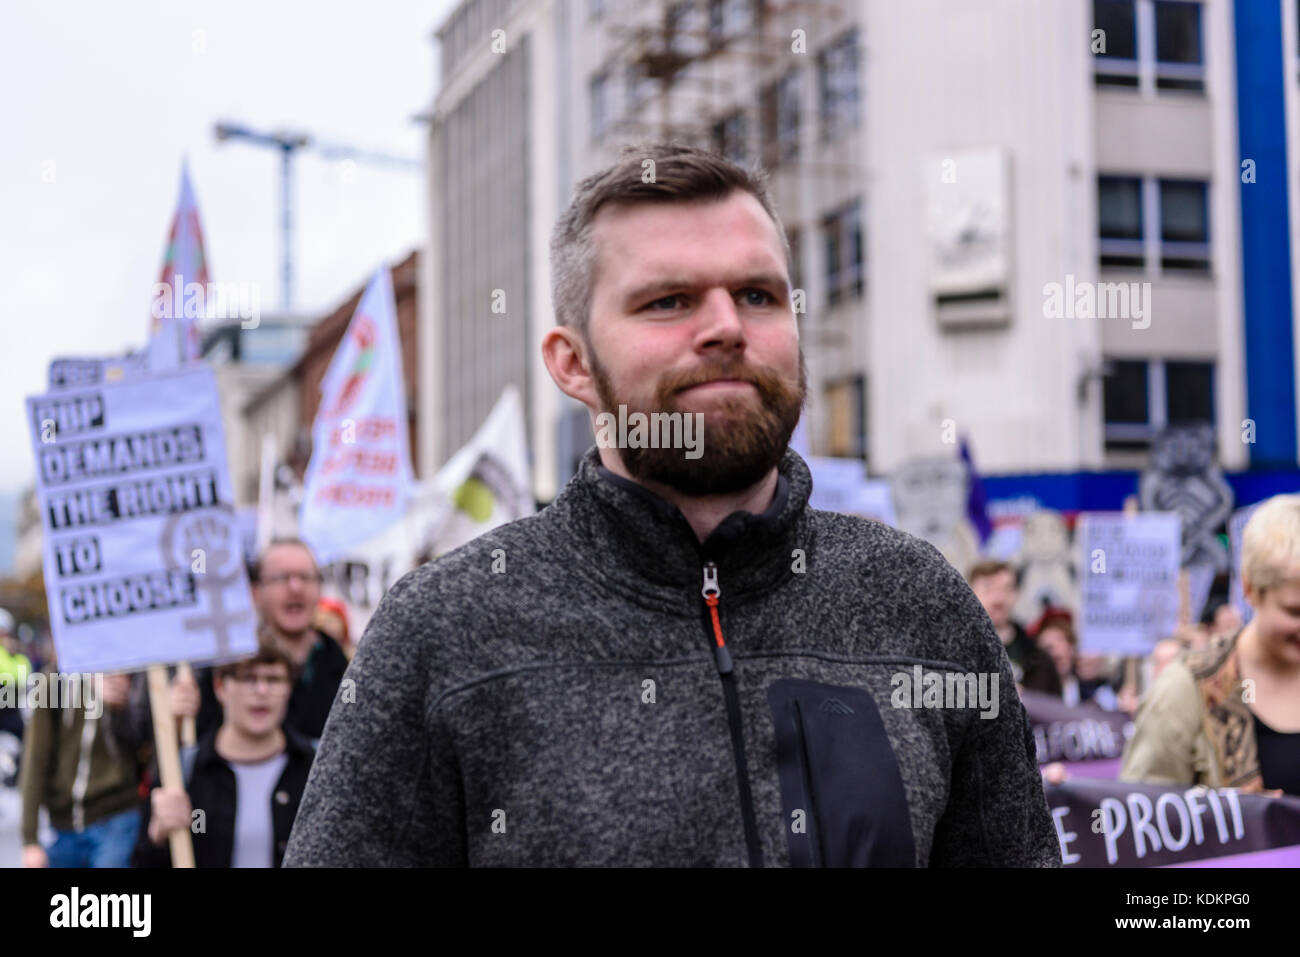 Belfast, Northern Ireland. 14/10/2017 - Gerry Carroll from the Irish political group People Before Profit at the Rally For Choice hold a parade in support of pro-choice abortion rights and women's reproductive rights.  Approximately 1200 people attended the event. Stock Photo